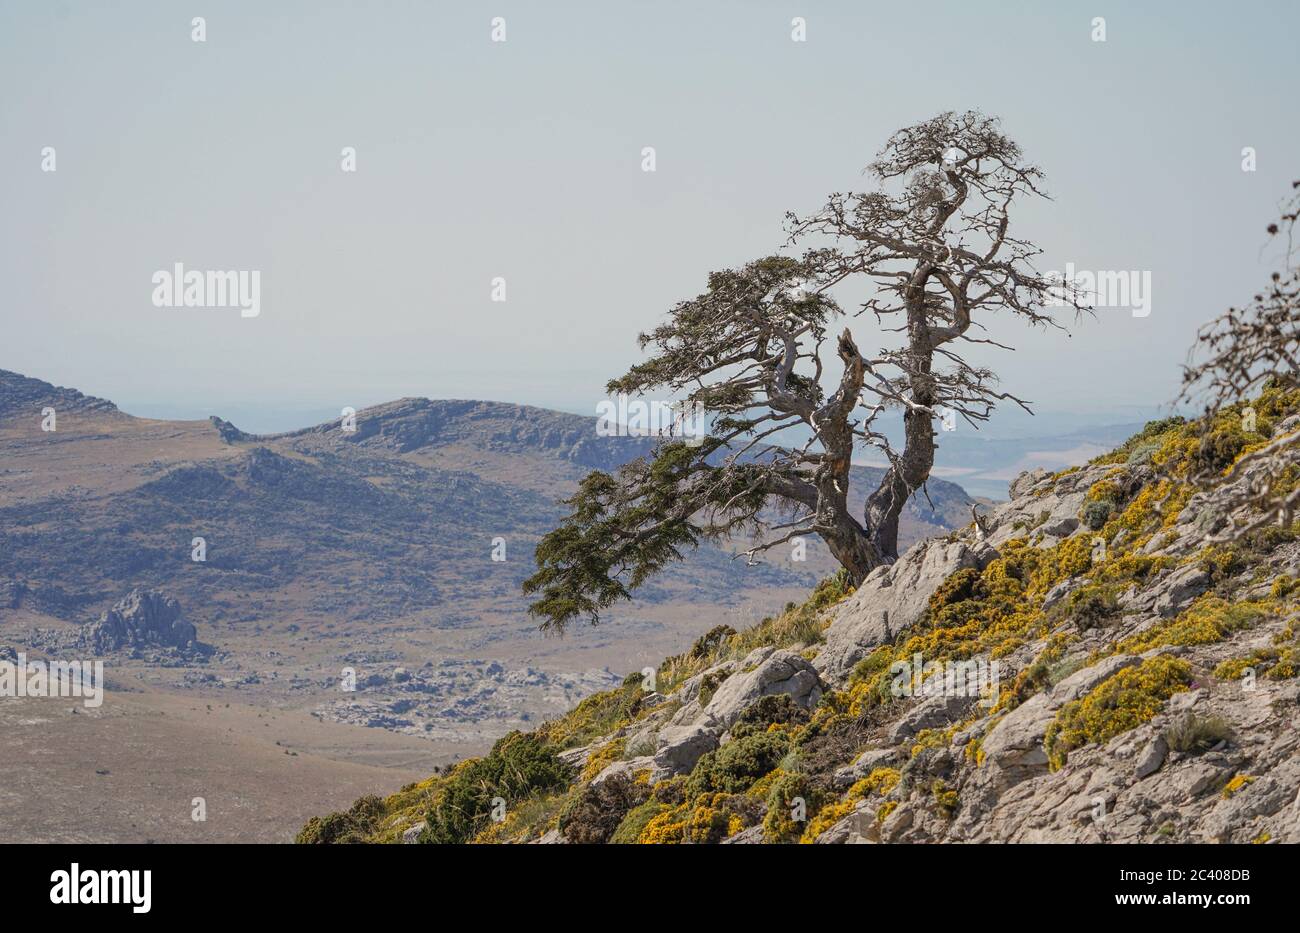 Sierra de las Nieves Natural Park, Old spanish fir tree (Abies pinsapo)  Biosphere Reserve., Malaga province. Andalusia, Southern Spain. Europe. Stock Photo